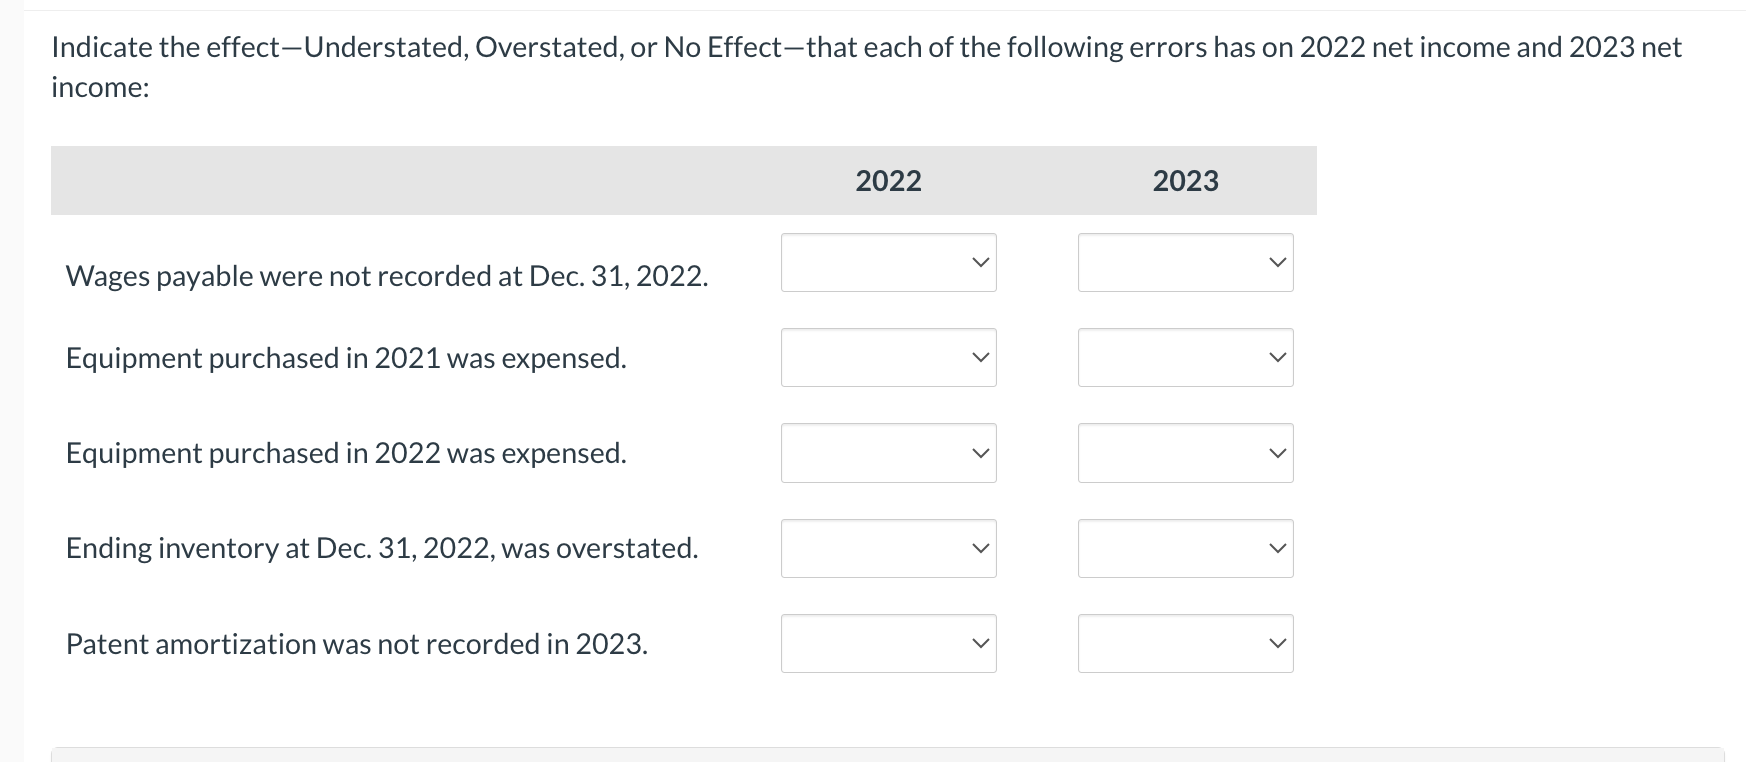 Indicate the effect-Understated, Overstated, or No Effect-that each of the following errors has on 2022 net